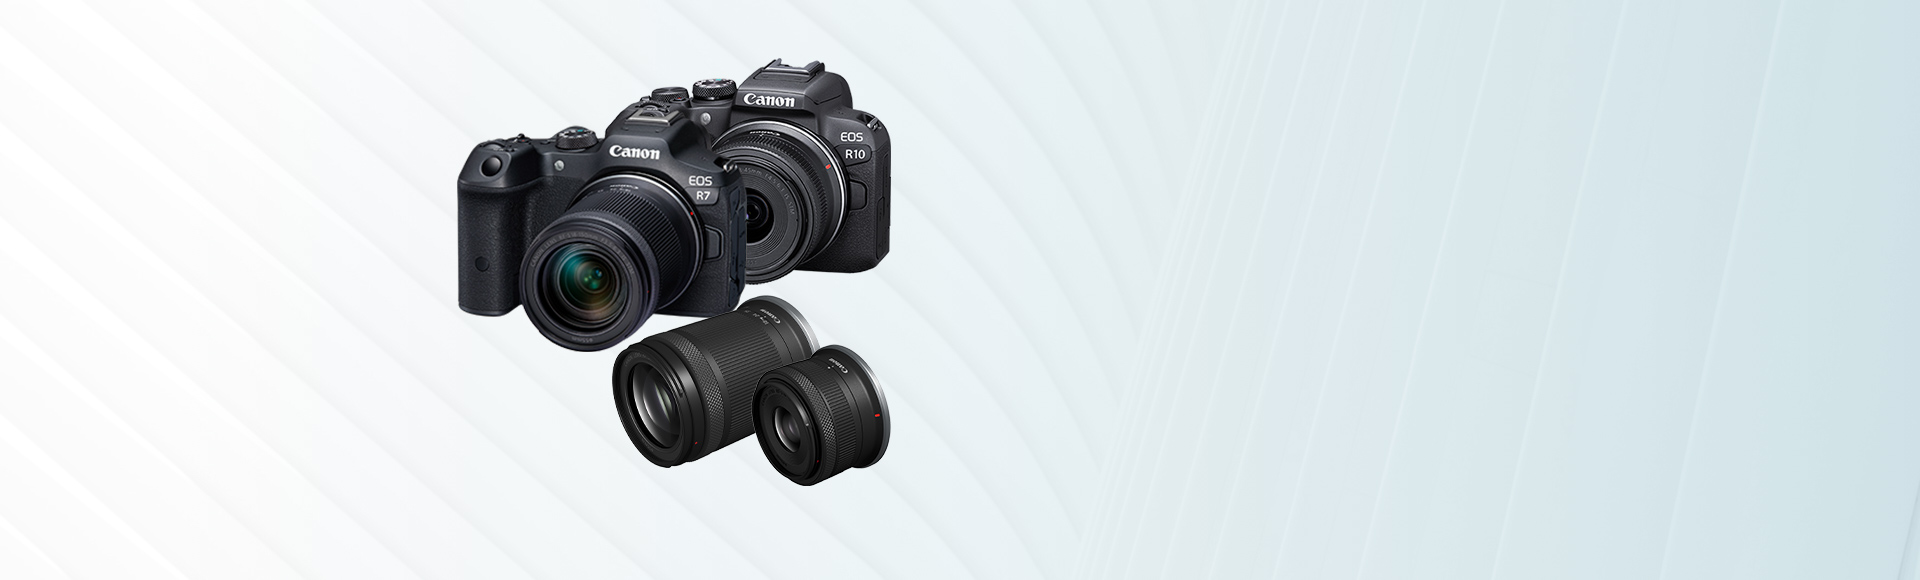 Meet Canon's New APS-C EOS Mirrorless Cameras and Lenses